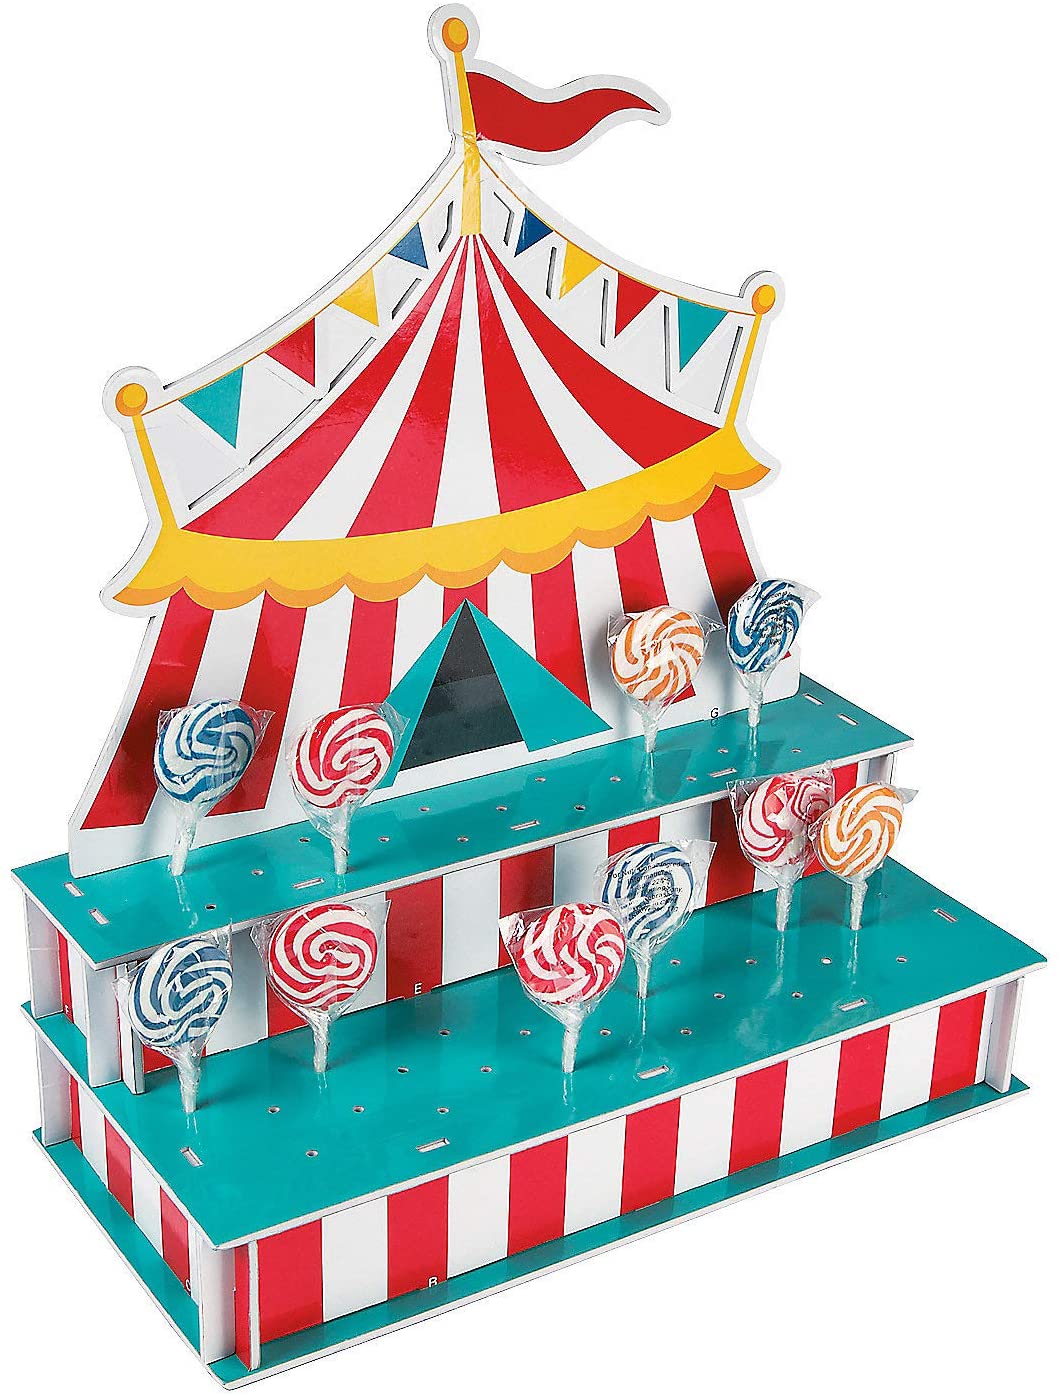 life's-a-circus-enjoy-the-party-lollipop-stand